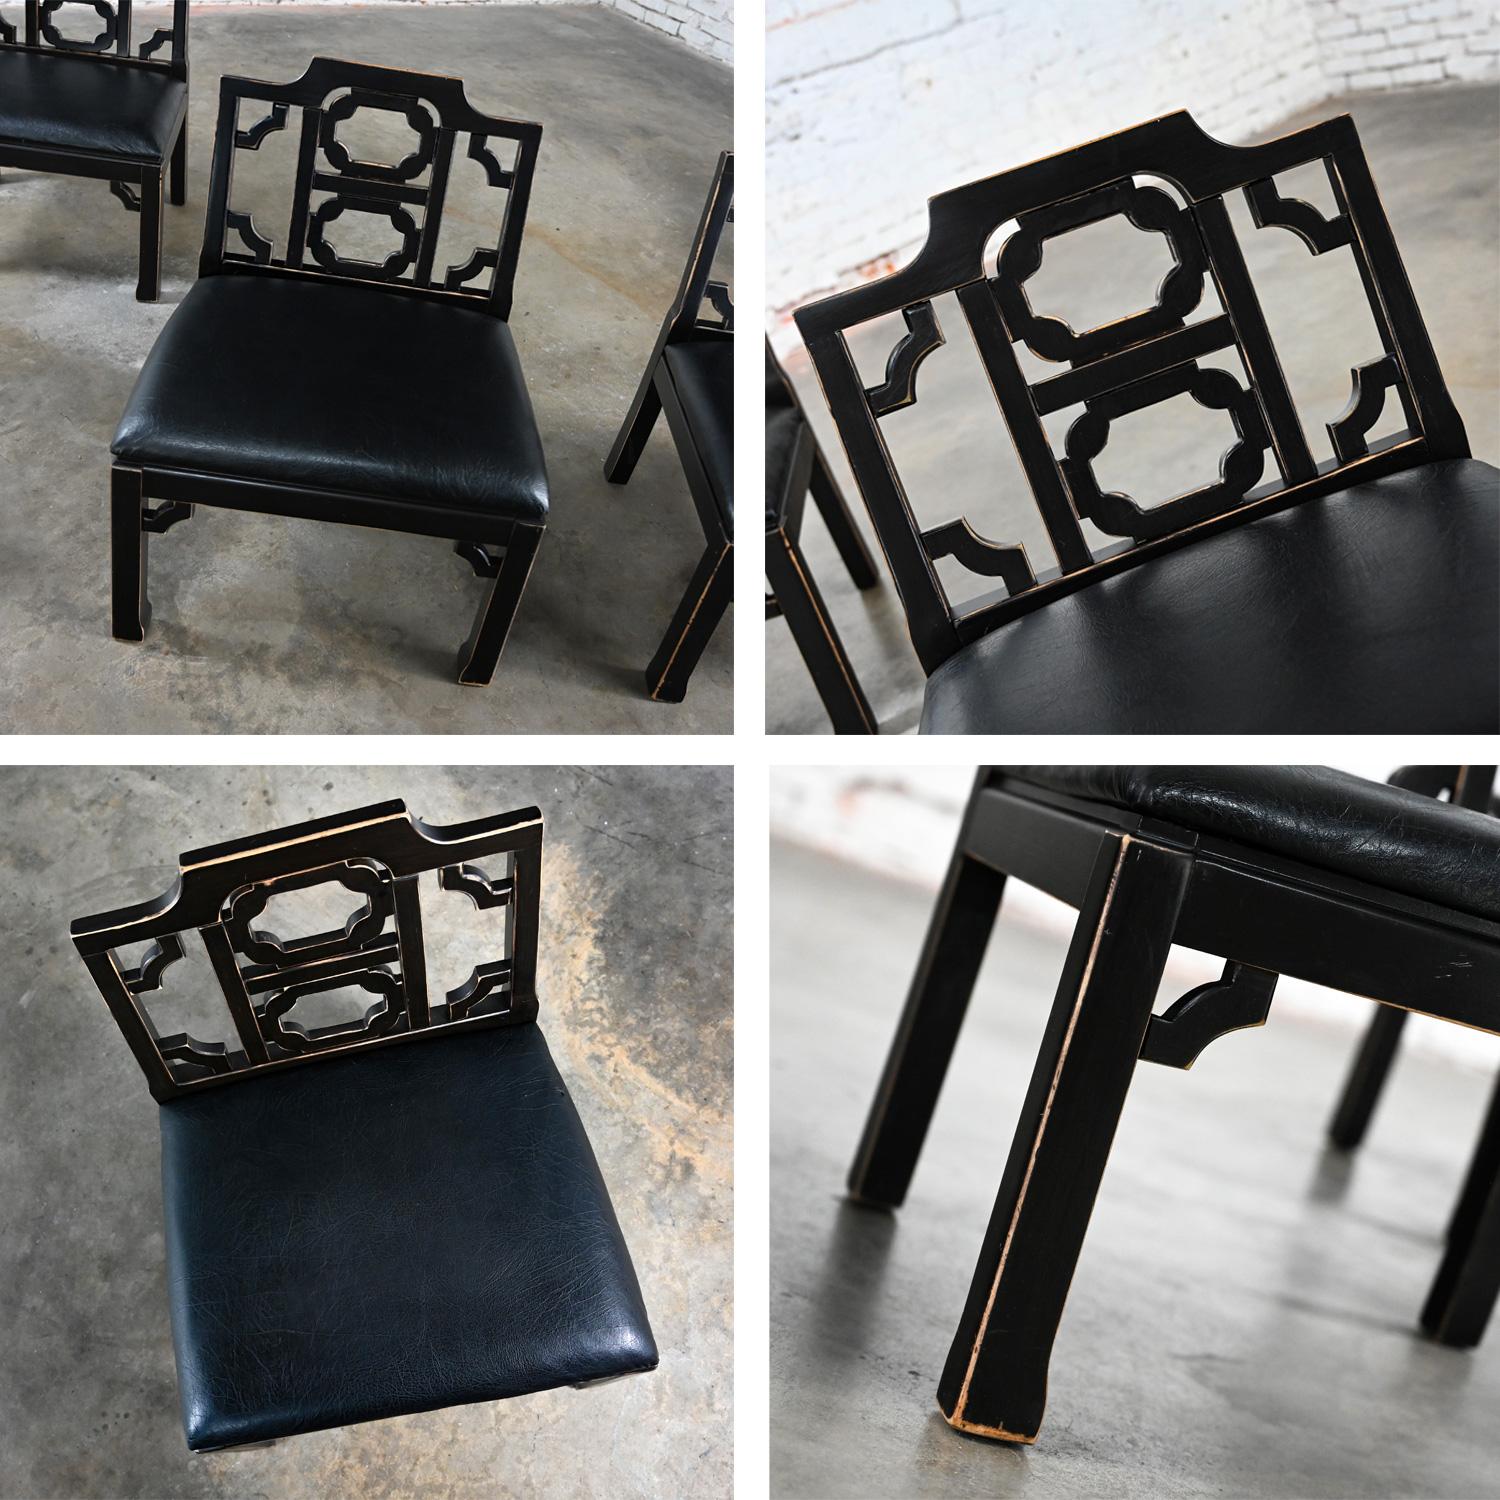 4 Hollywood Regency Chinese Chippendale Style Black Accent Chairs by Thomasville For Sale 10